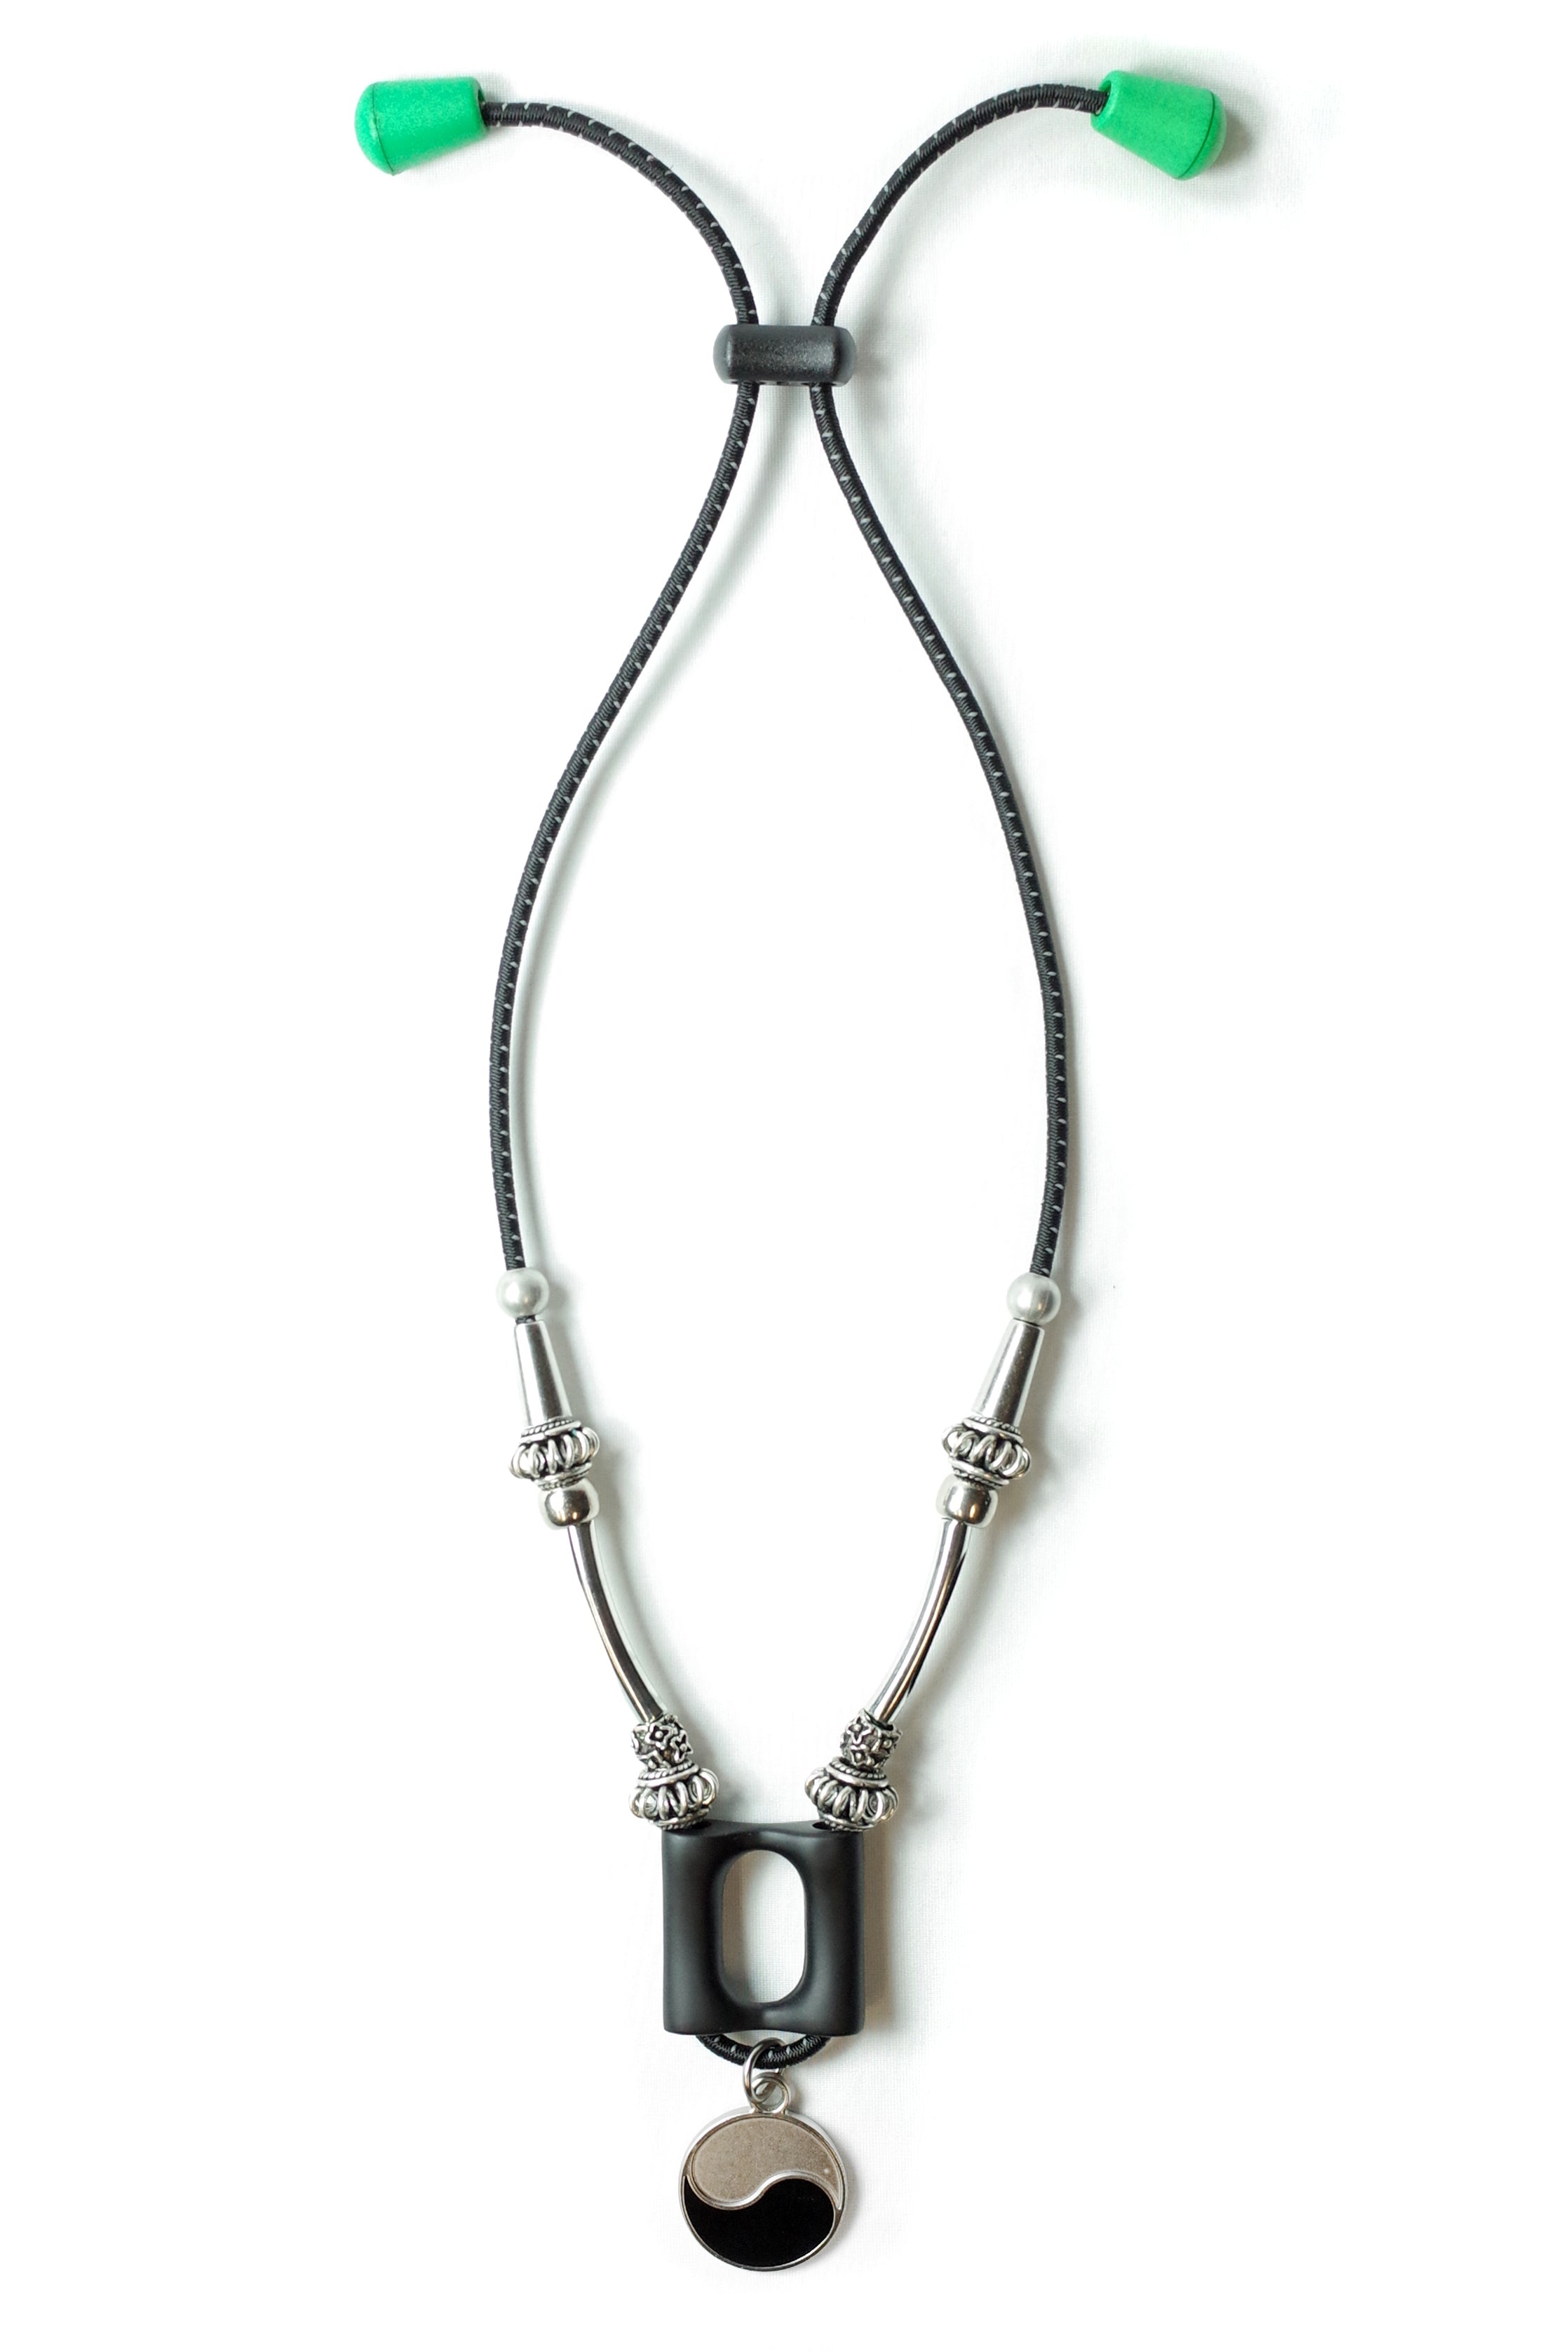 HOMME BOY CO. - Acc. 6 Col. 1 - Ball Chain Necklace